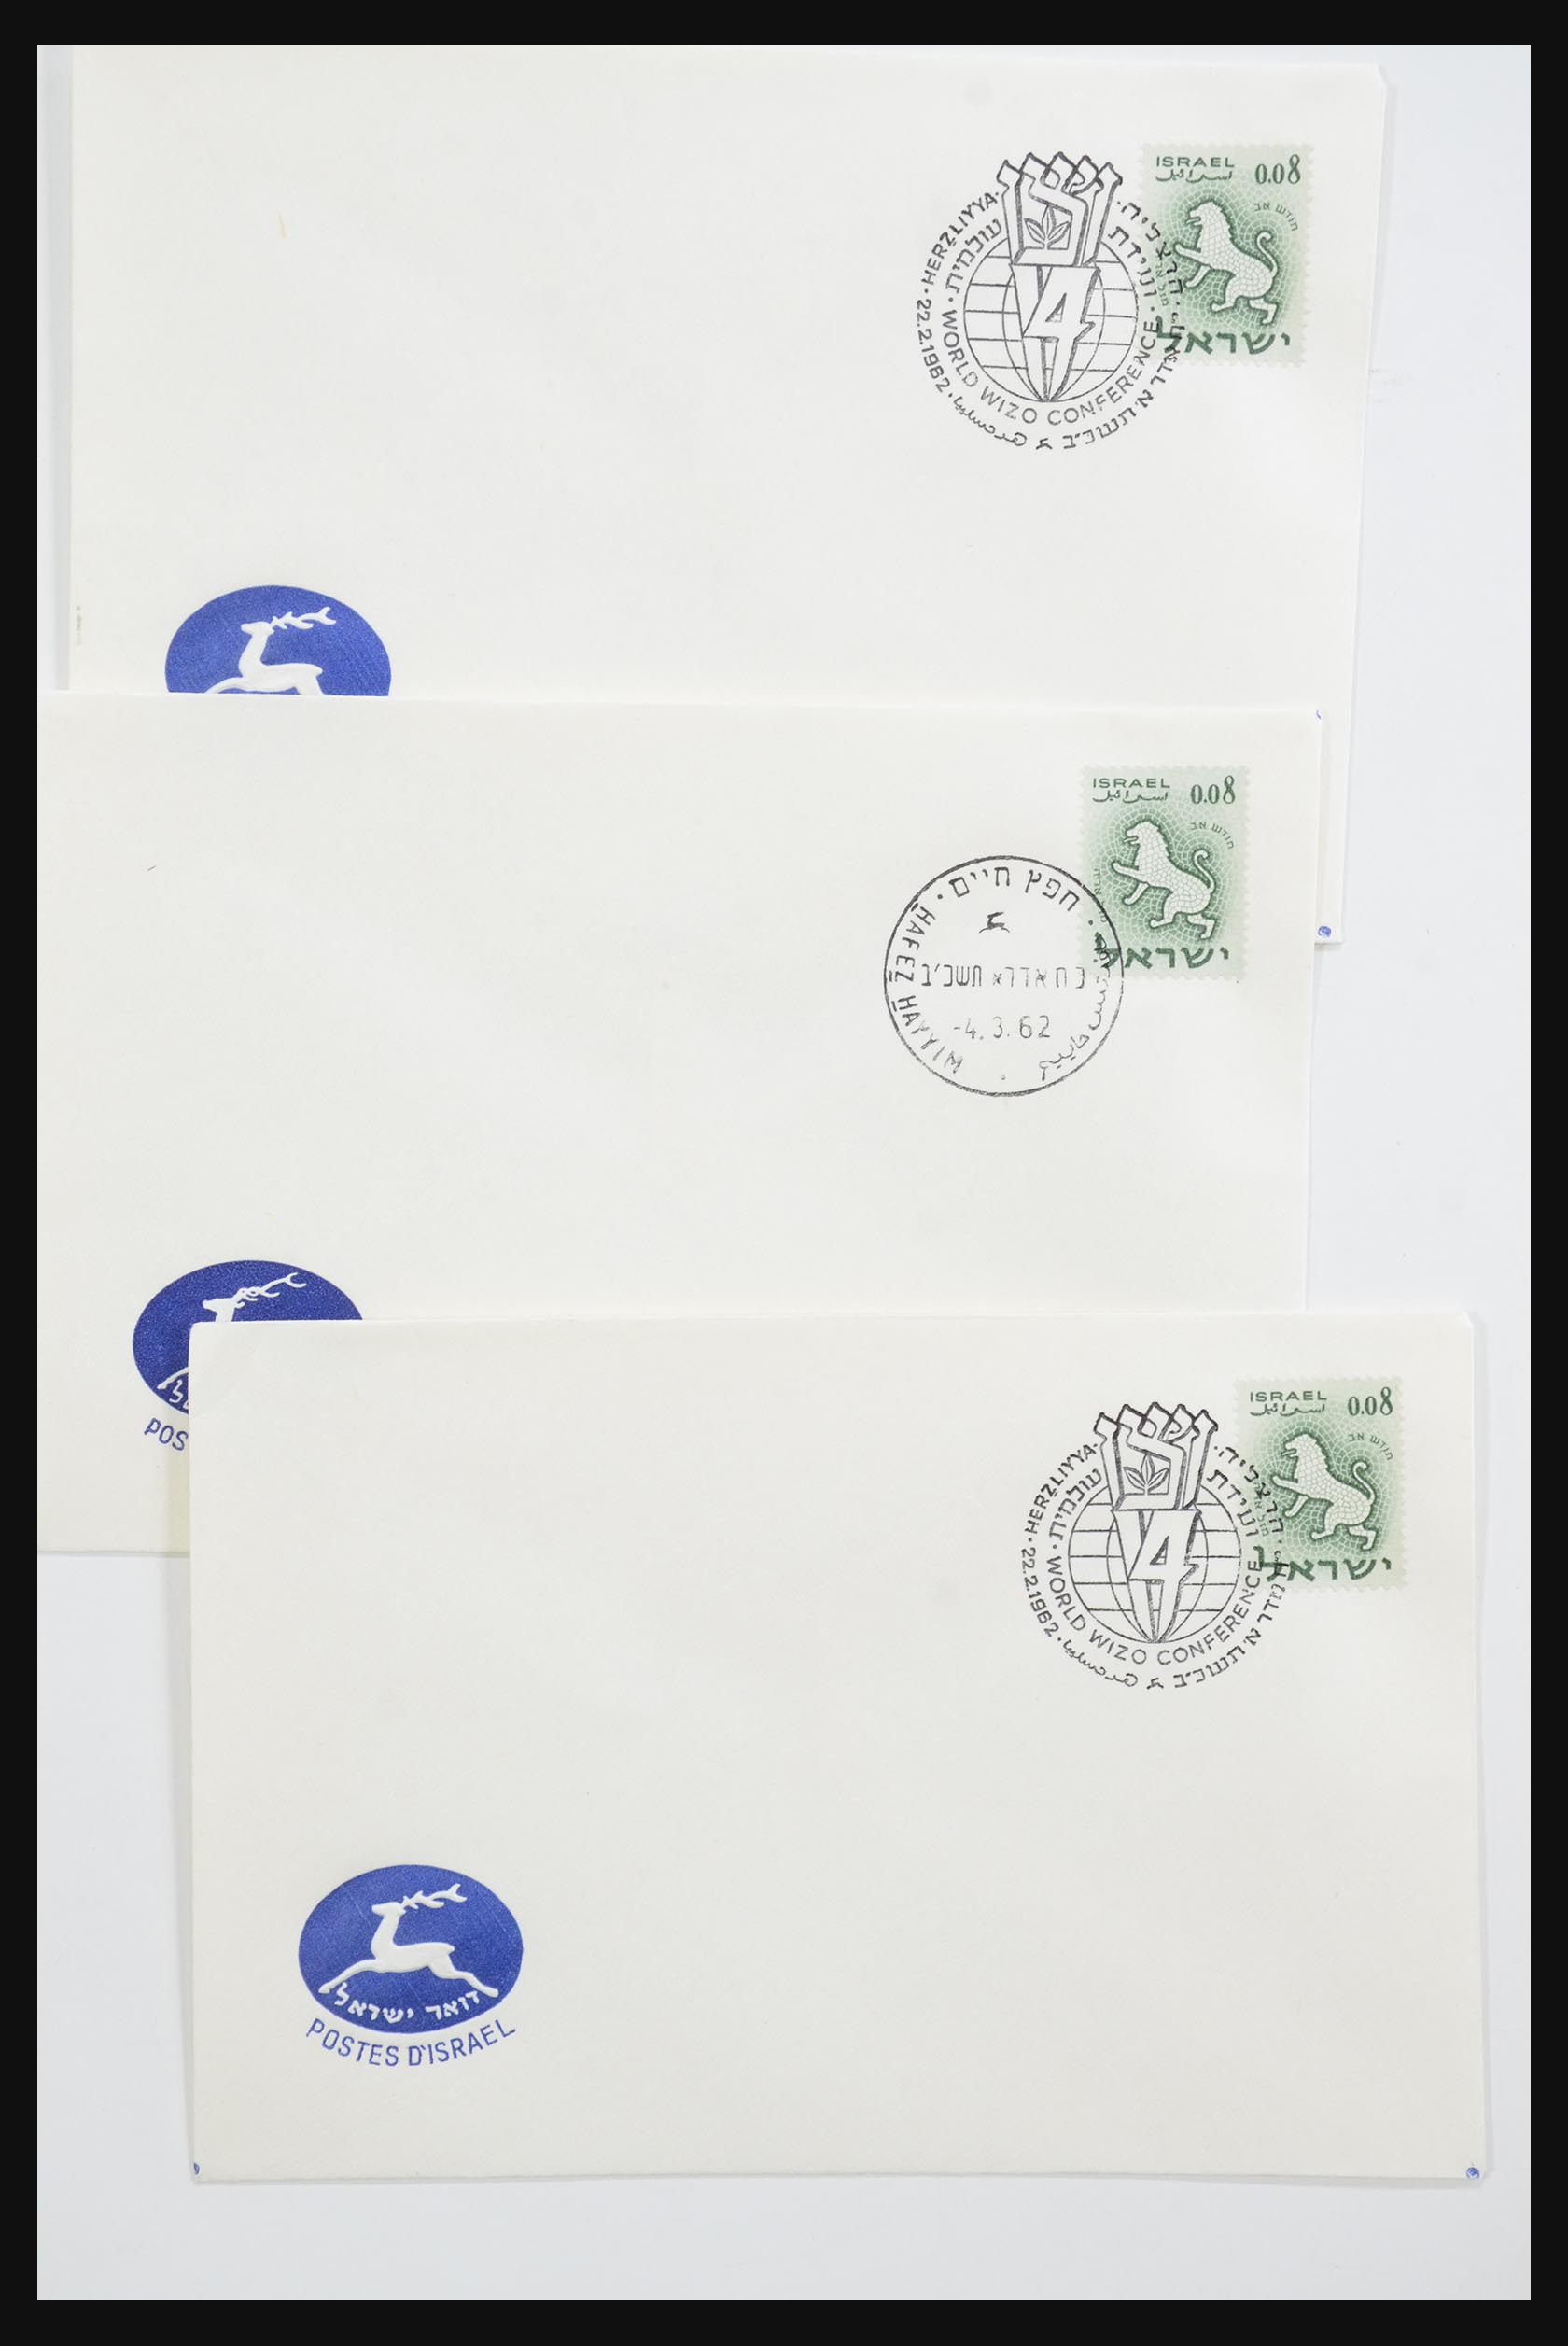 31924 042 - 31924 Israel first day cover collection 1957-2003.